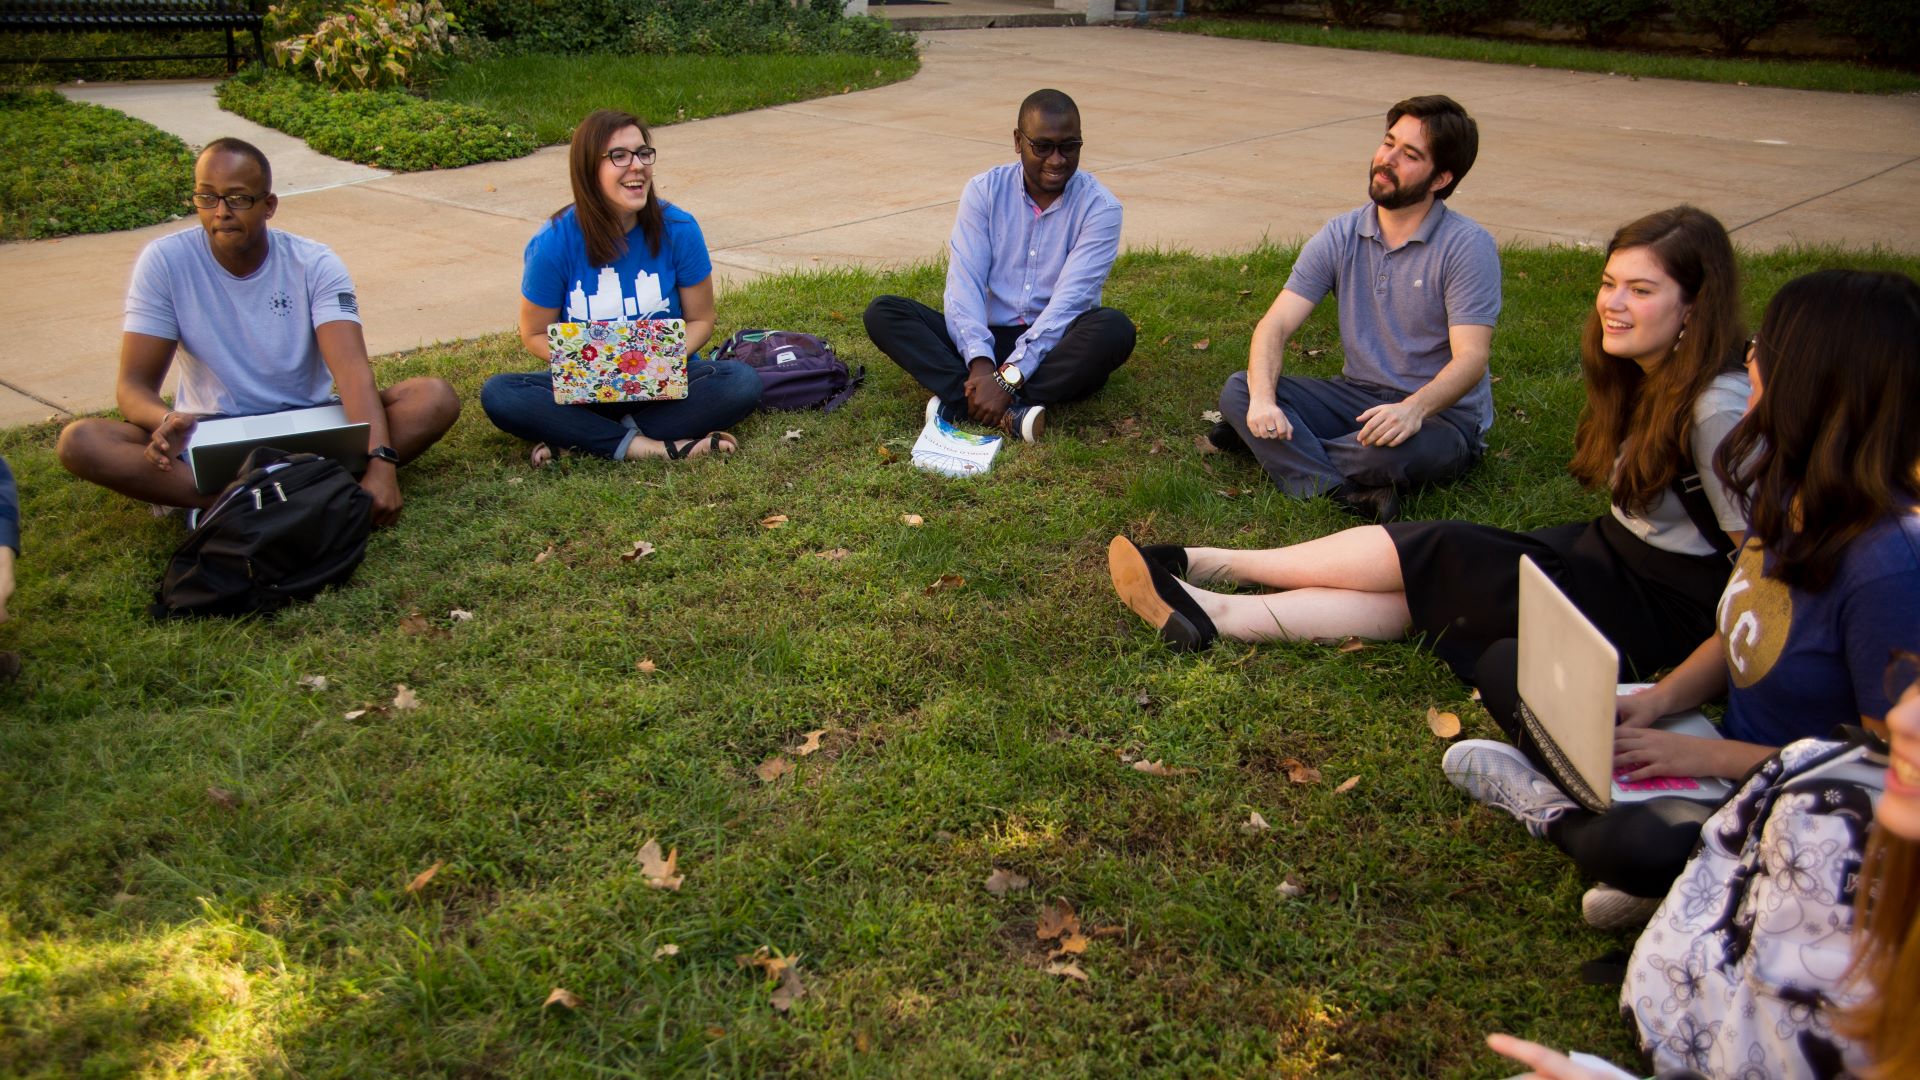 students sit in a circle on the grass on the campus lawn. They are smiling and laughing while having a discussion with their political science professor. Some have open laptops in their laps.